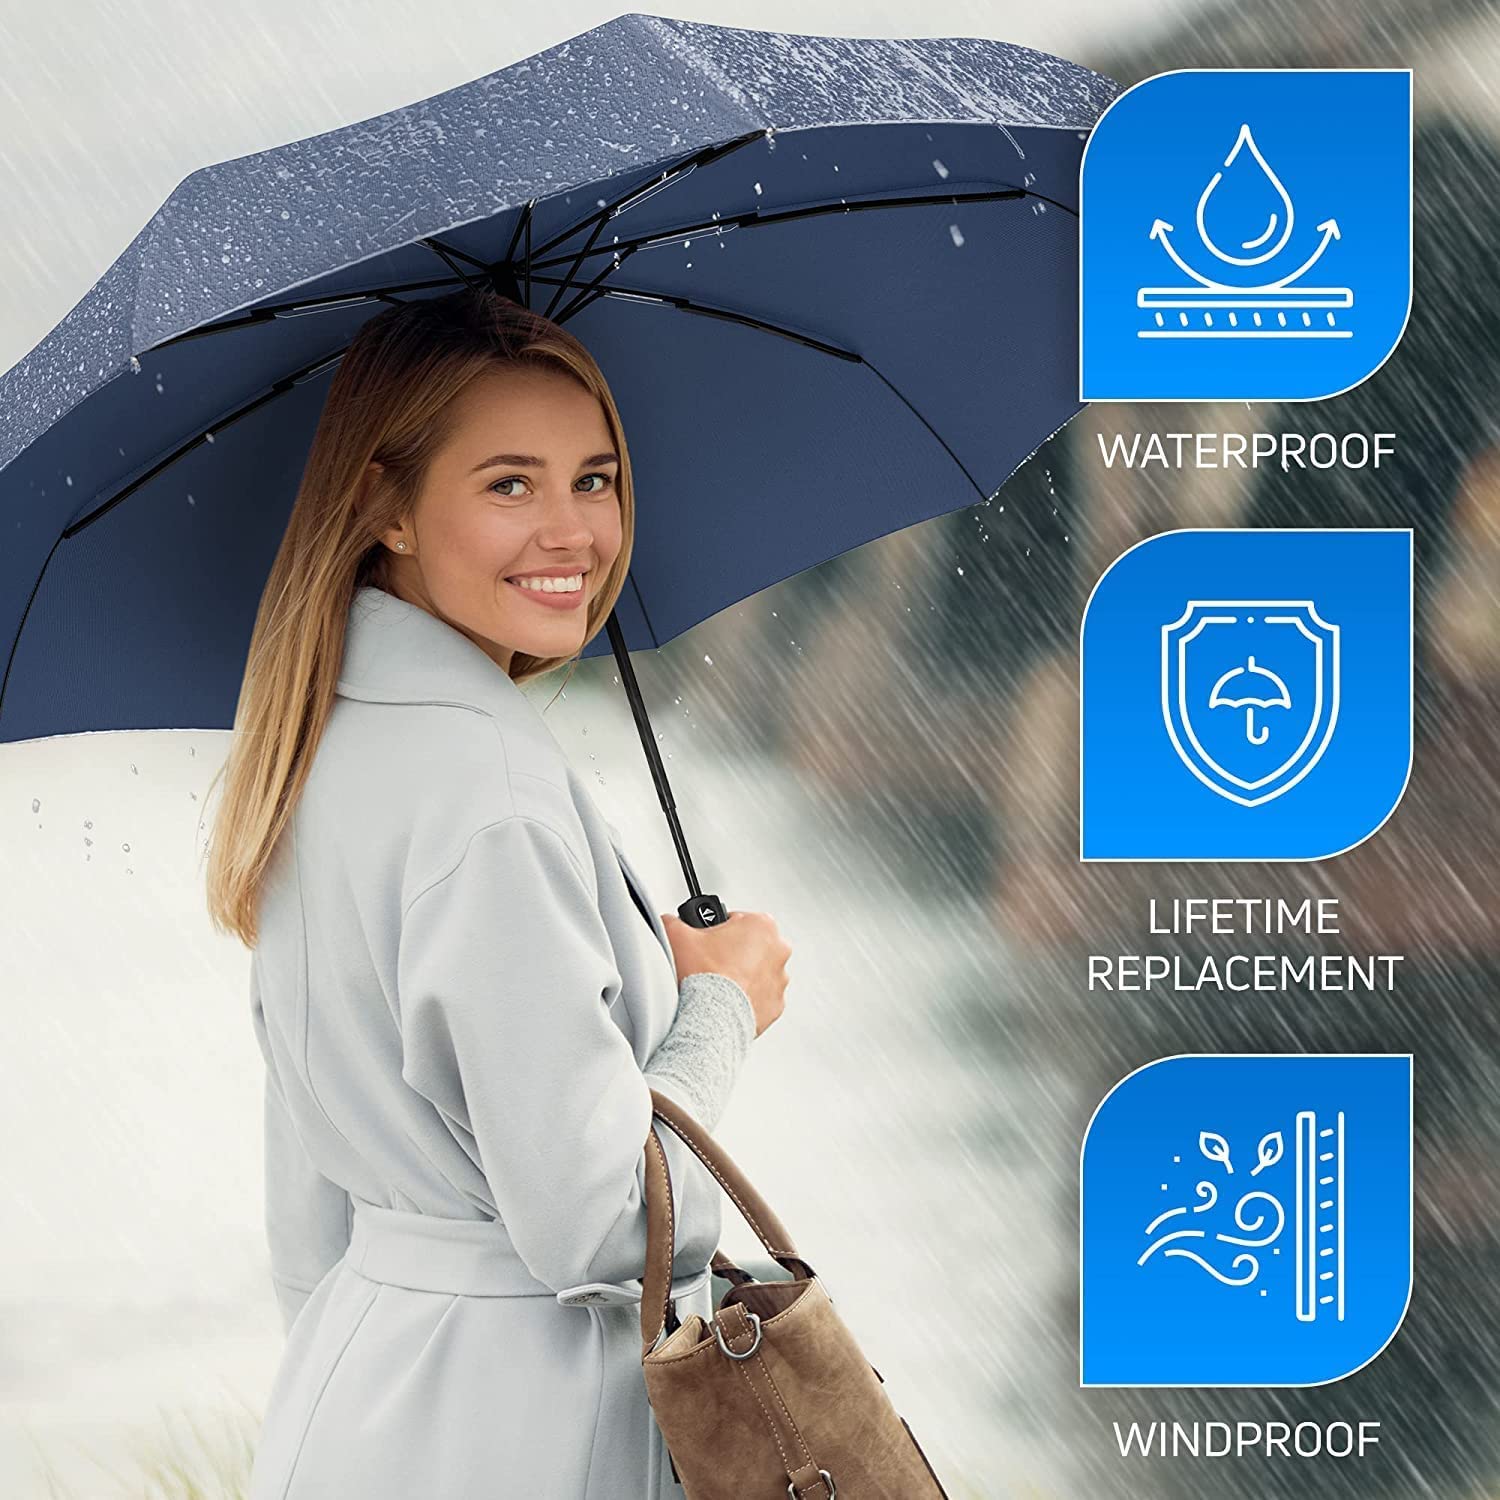 SKYTONE Umbrella for Men and Women– 3 Fold with Auto Open and Close 43 Inch Large Umbrella (BLUE)